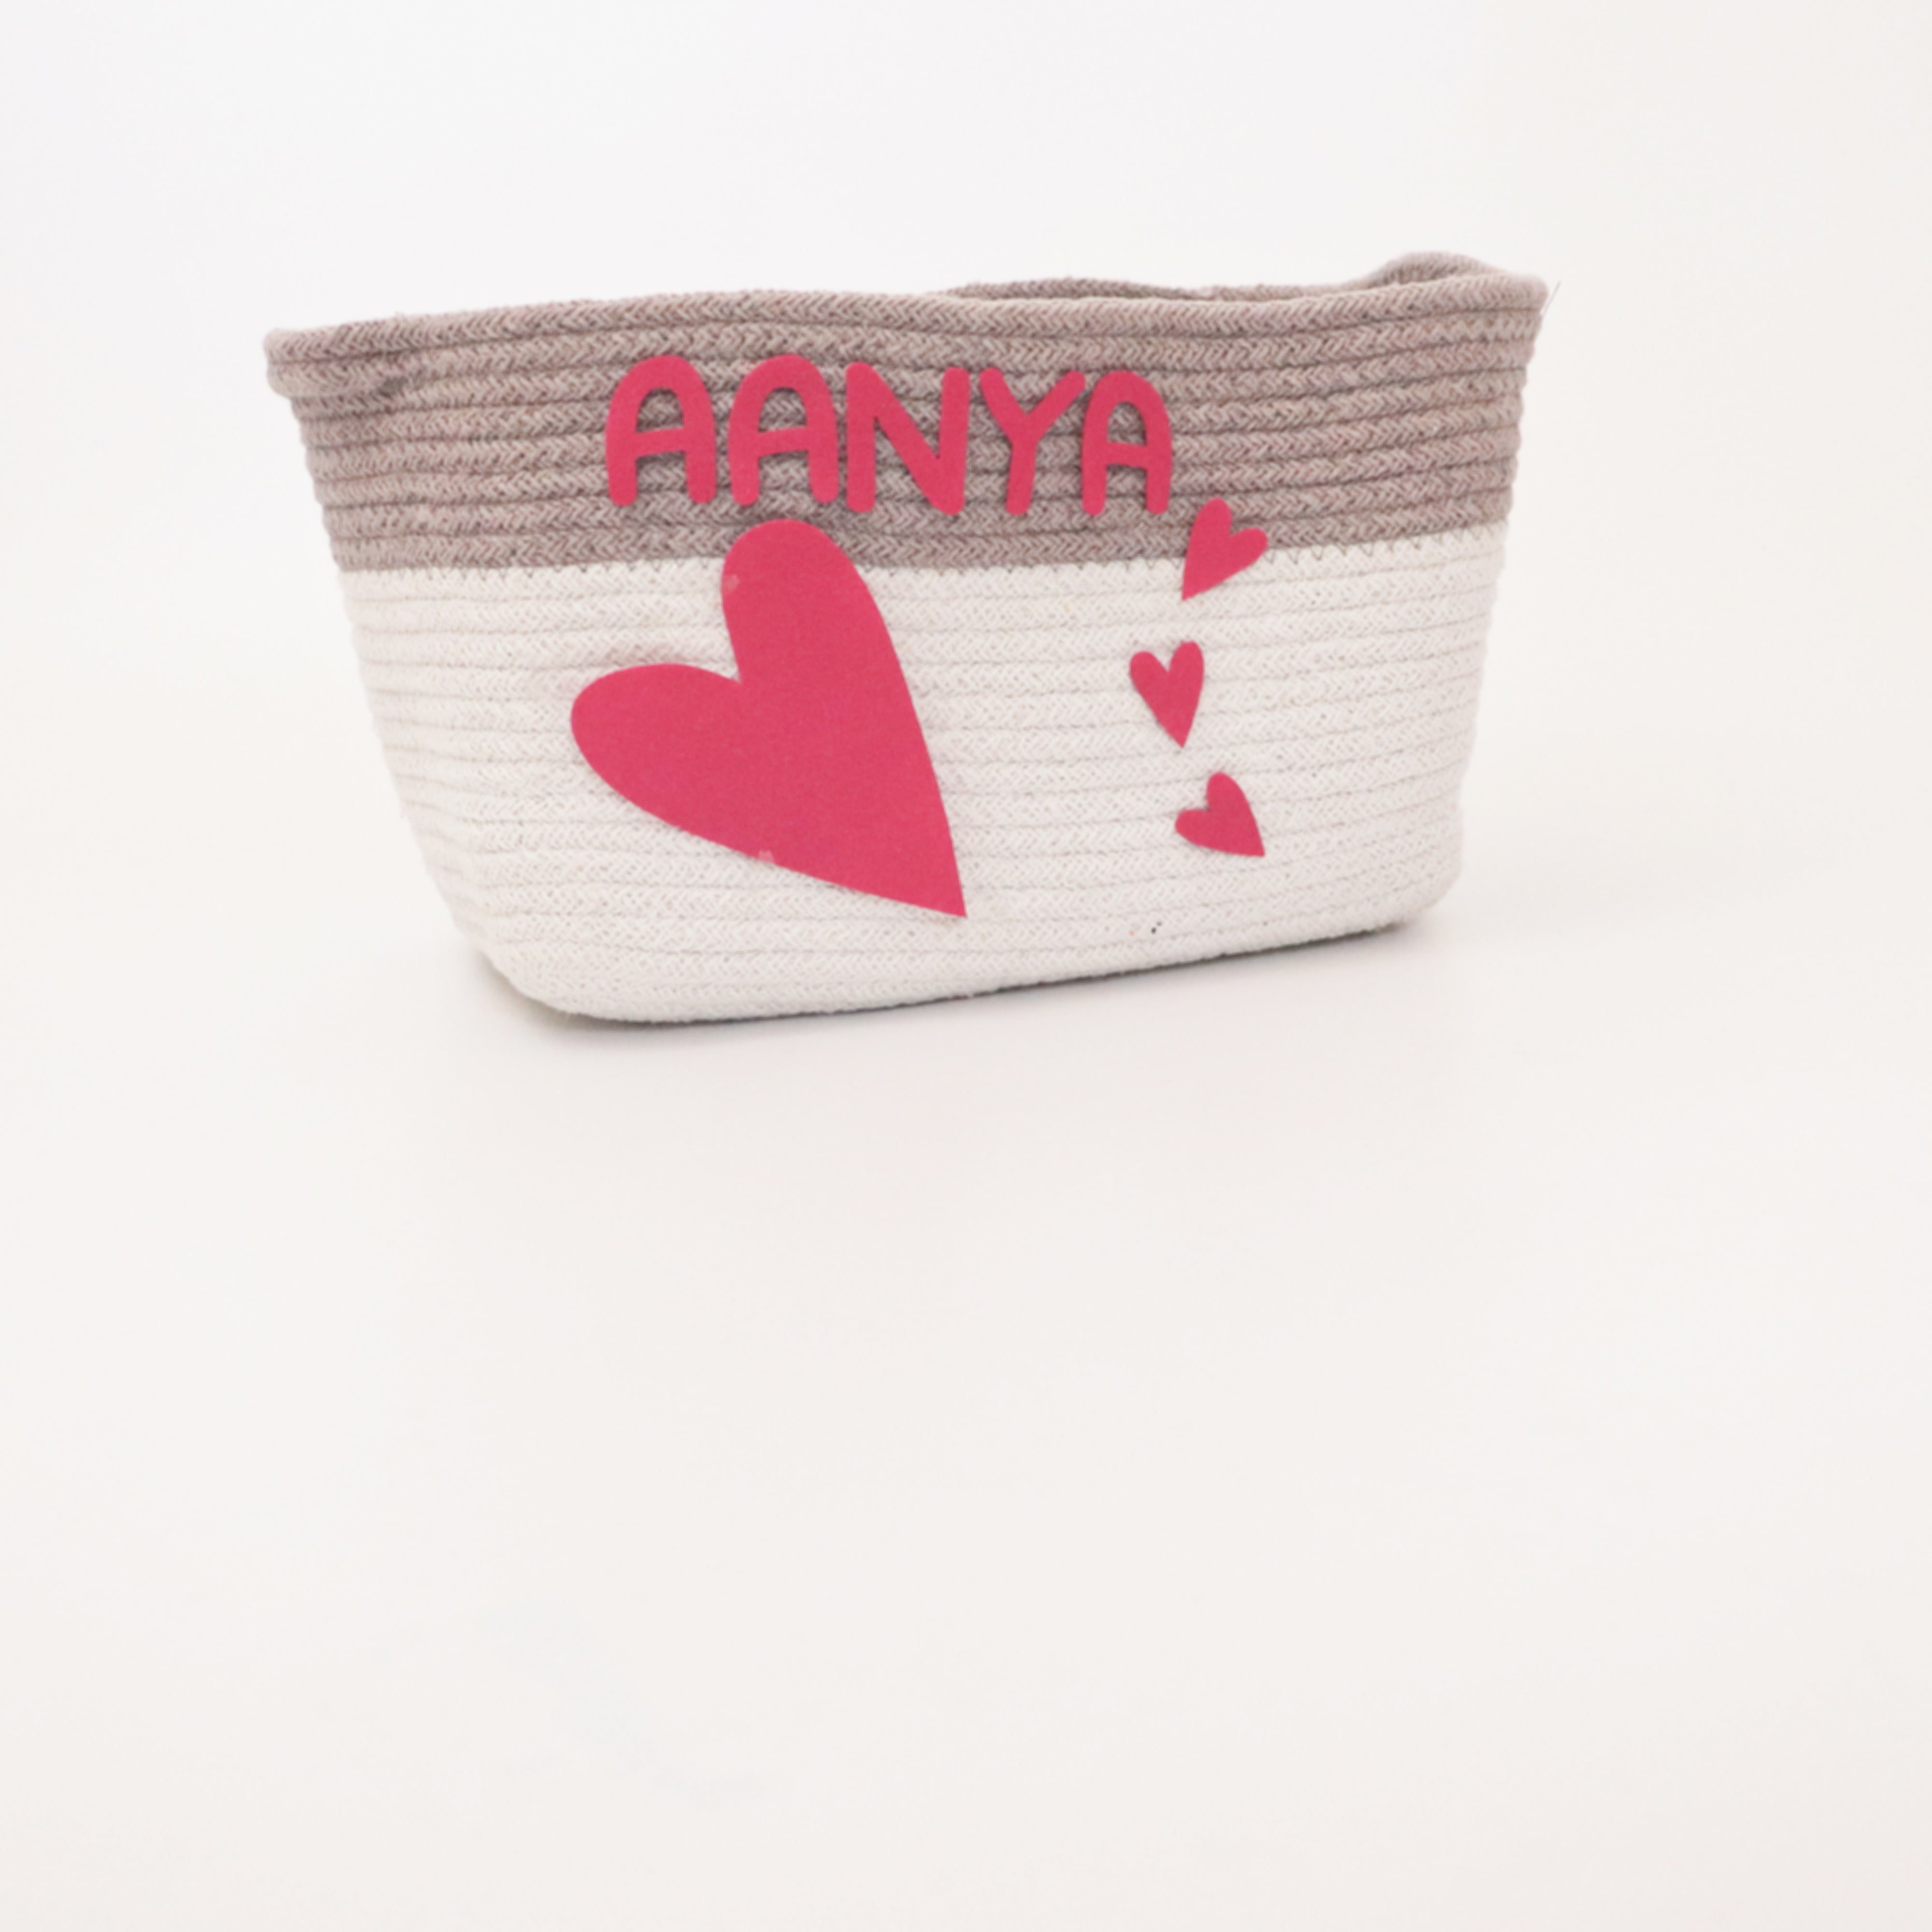 Personalised Return Gift Collection - Pink Hearts (Storage Basket & Wall Frame)